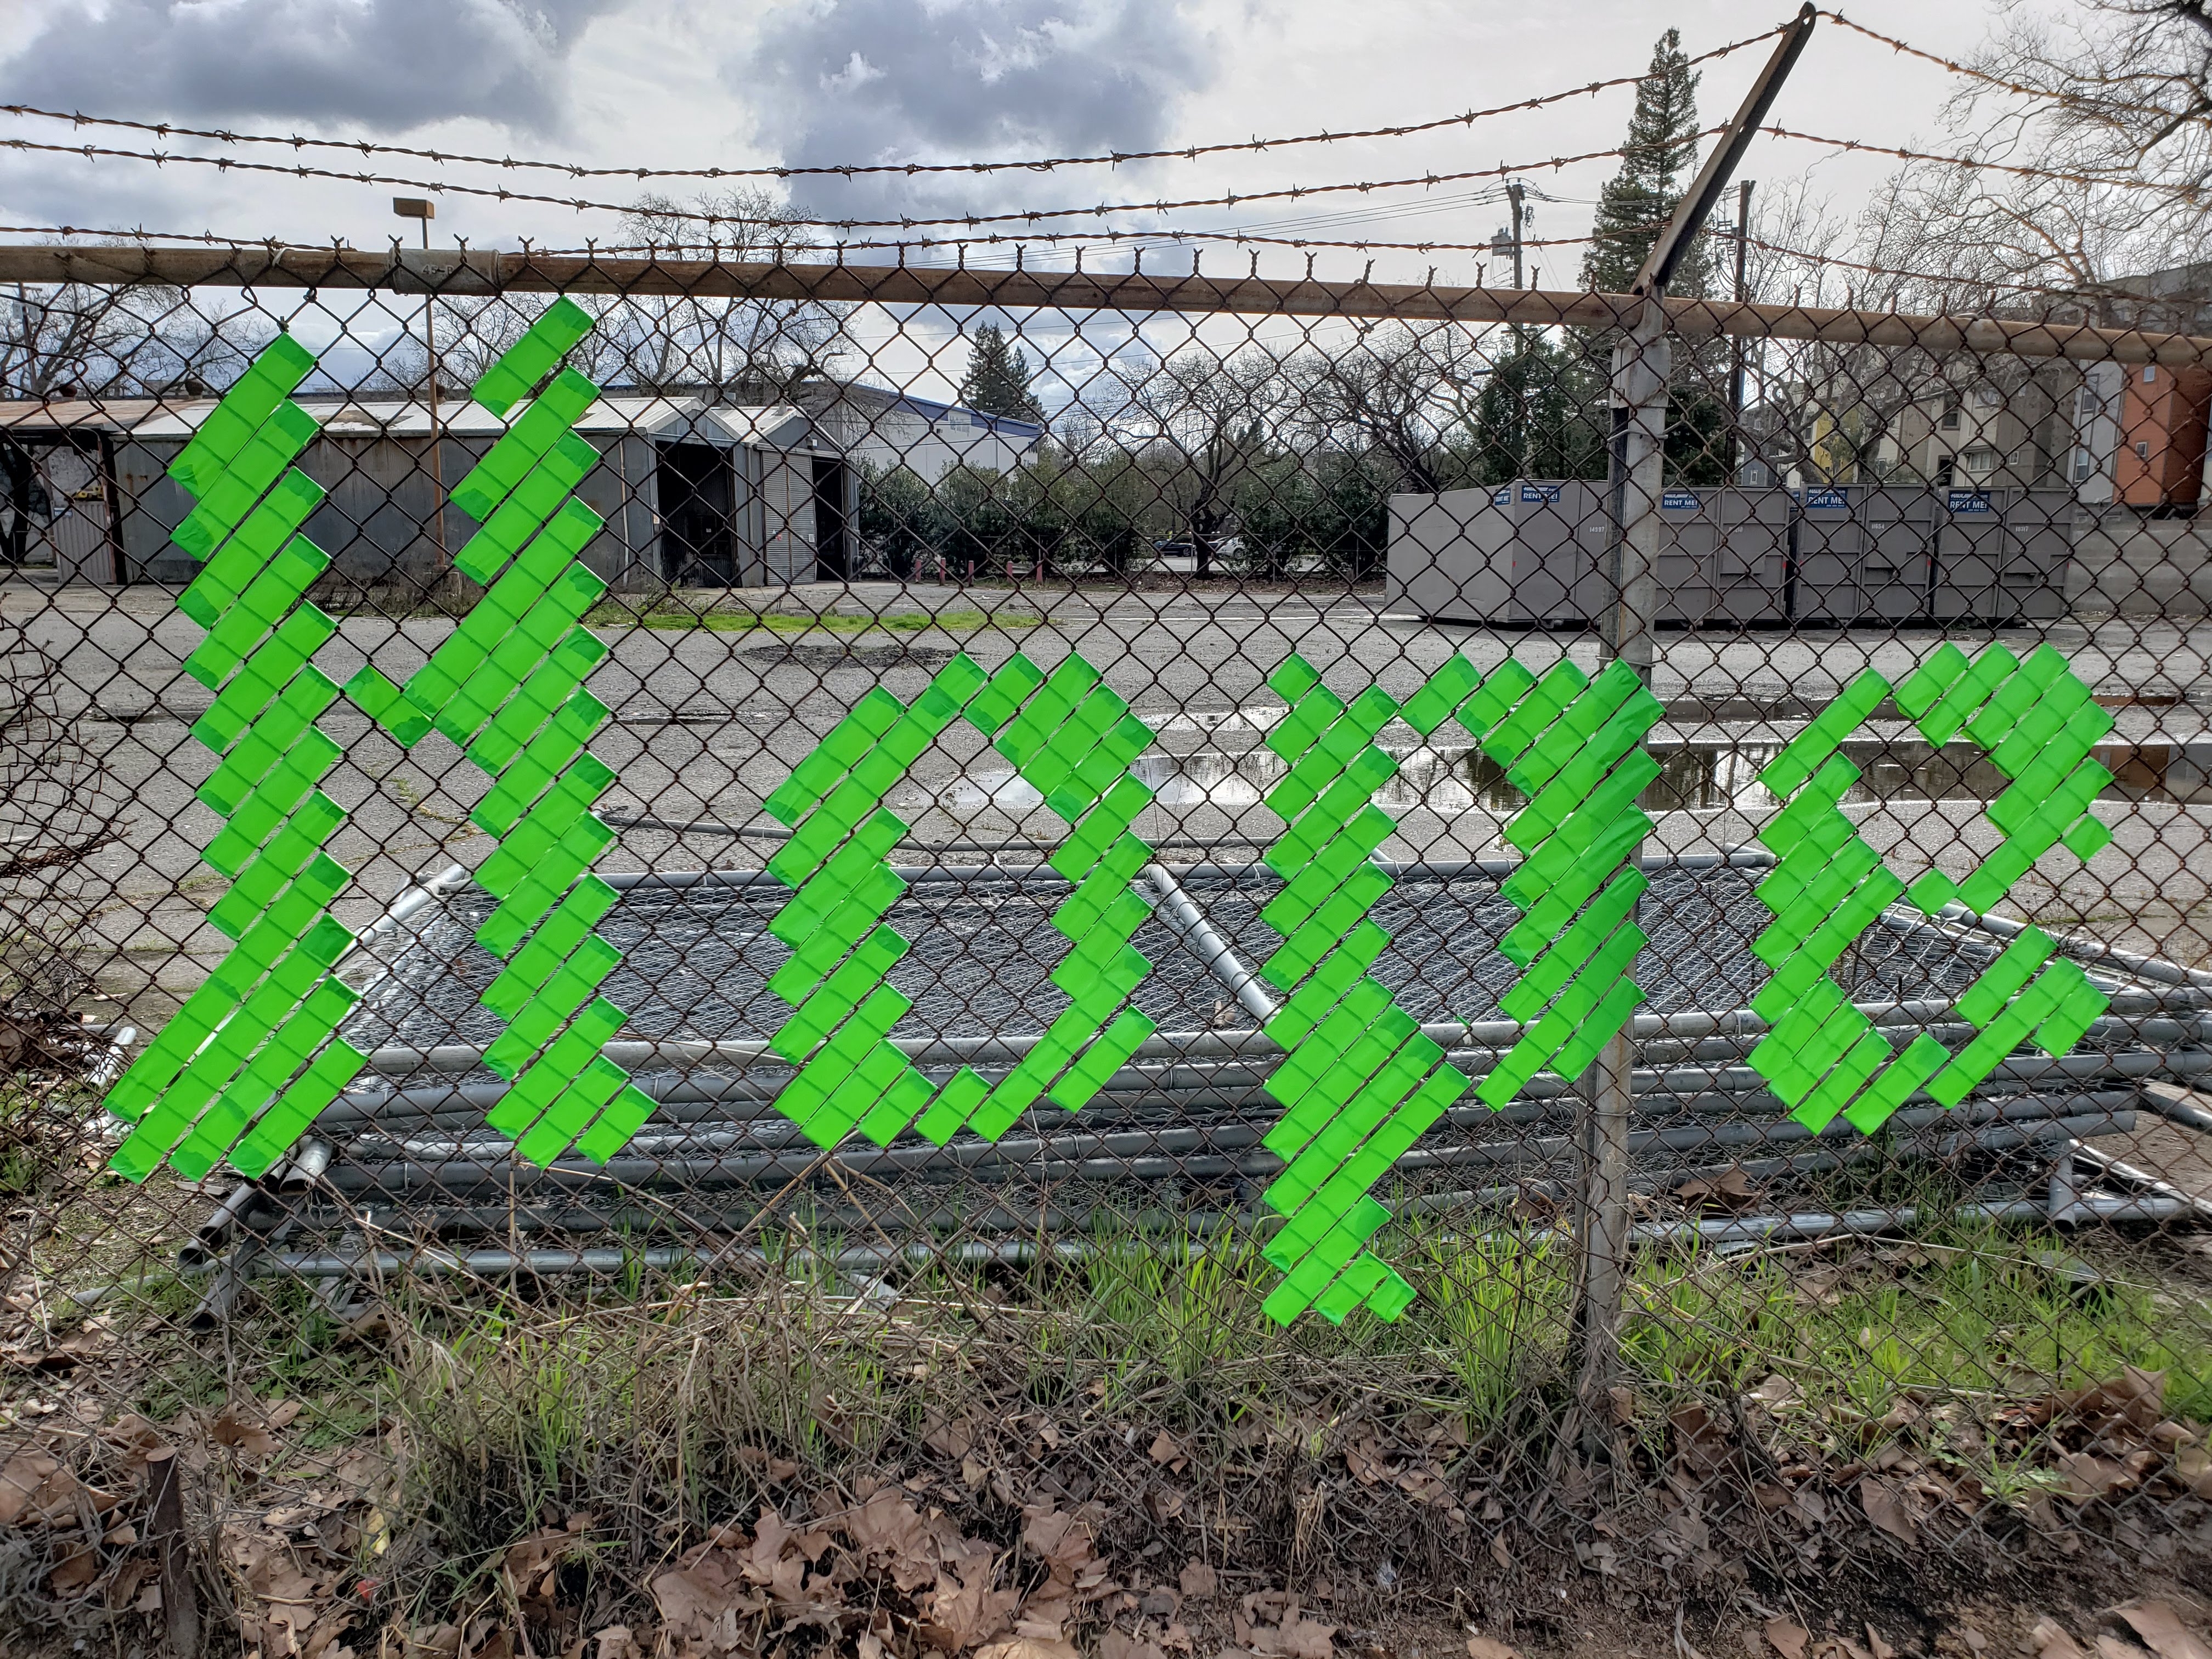 Hope spelled out on fence in lime green